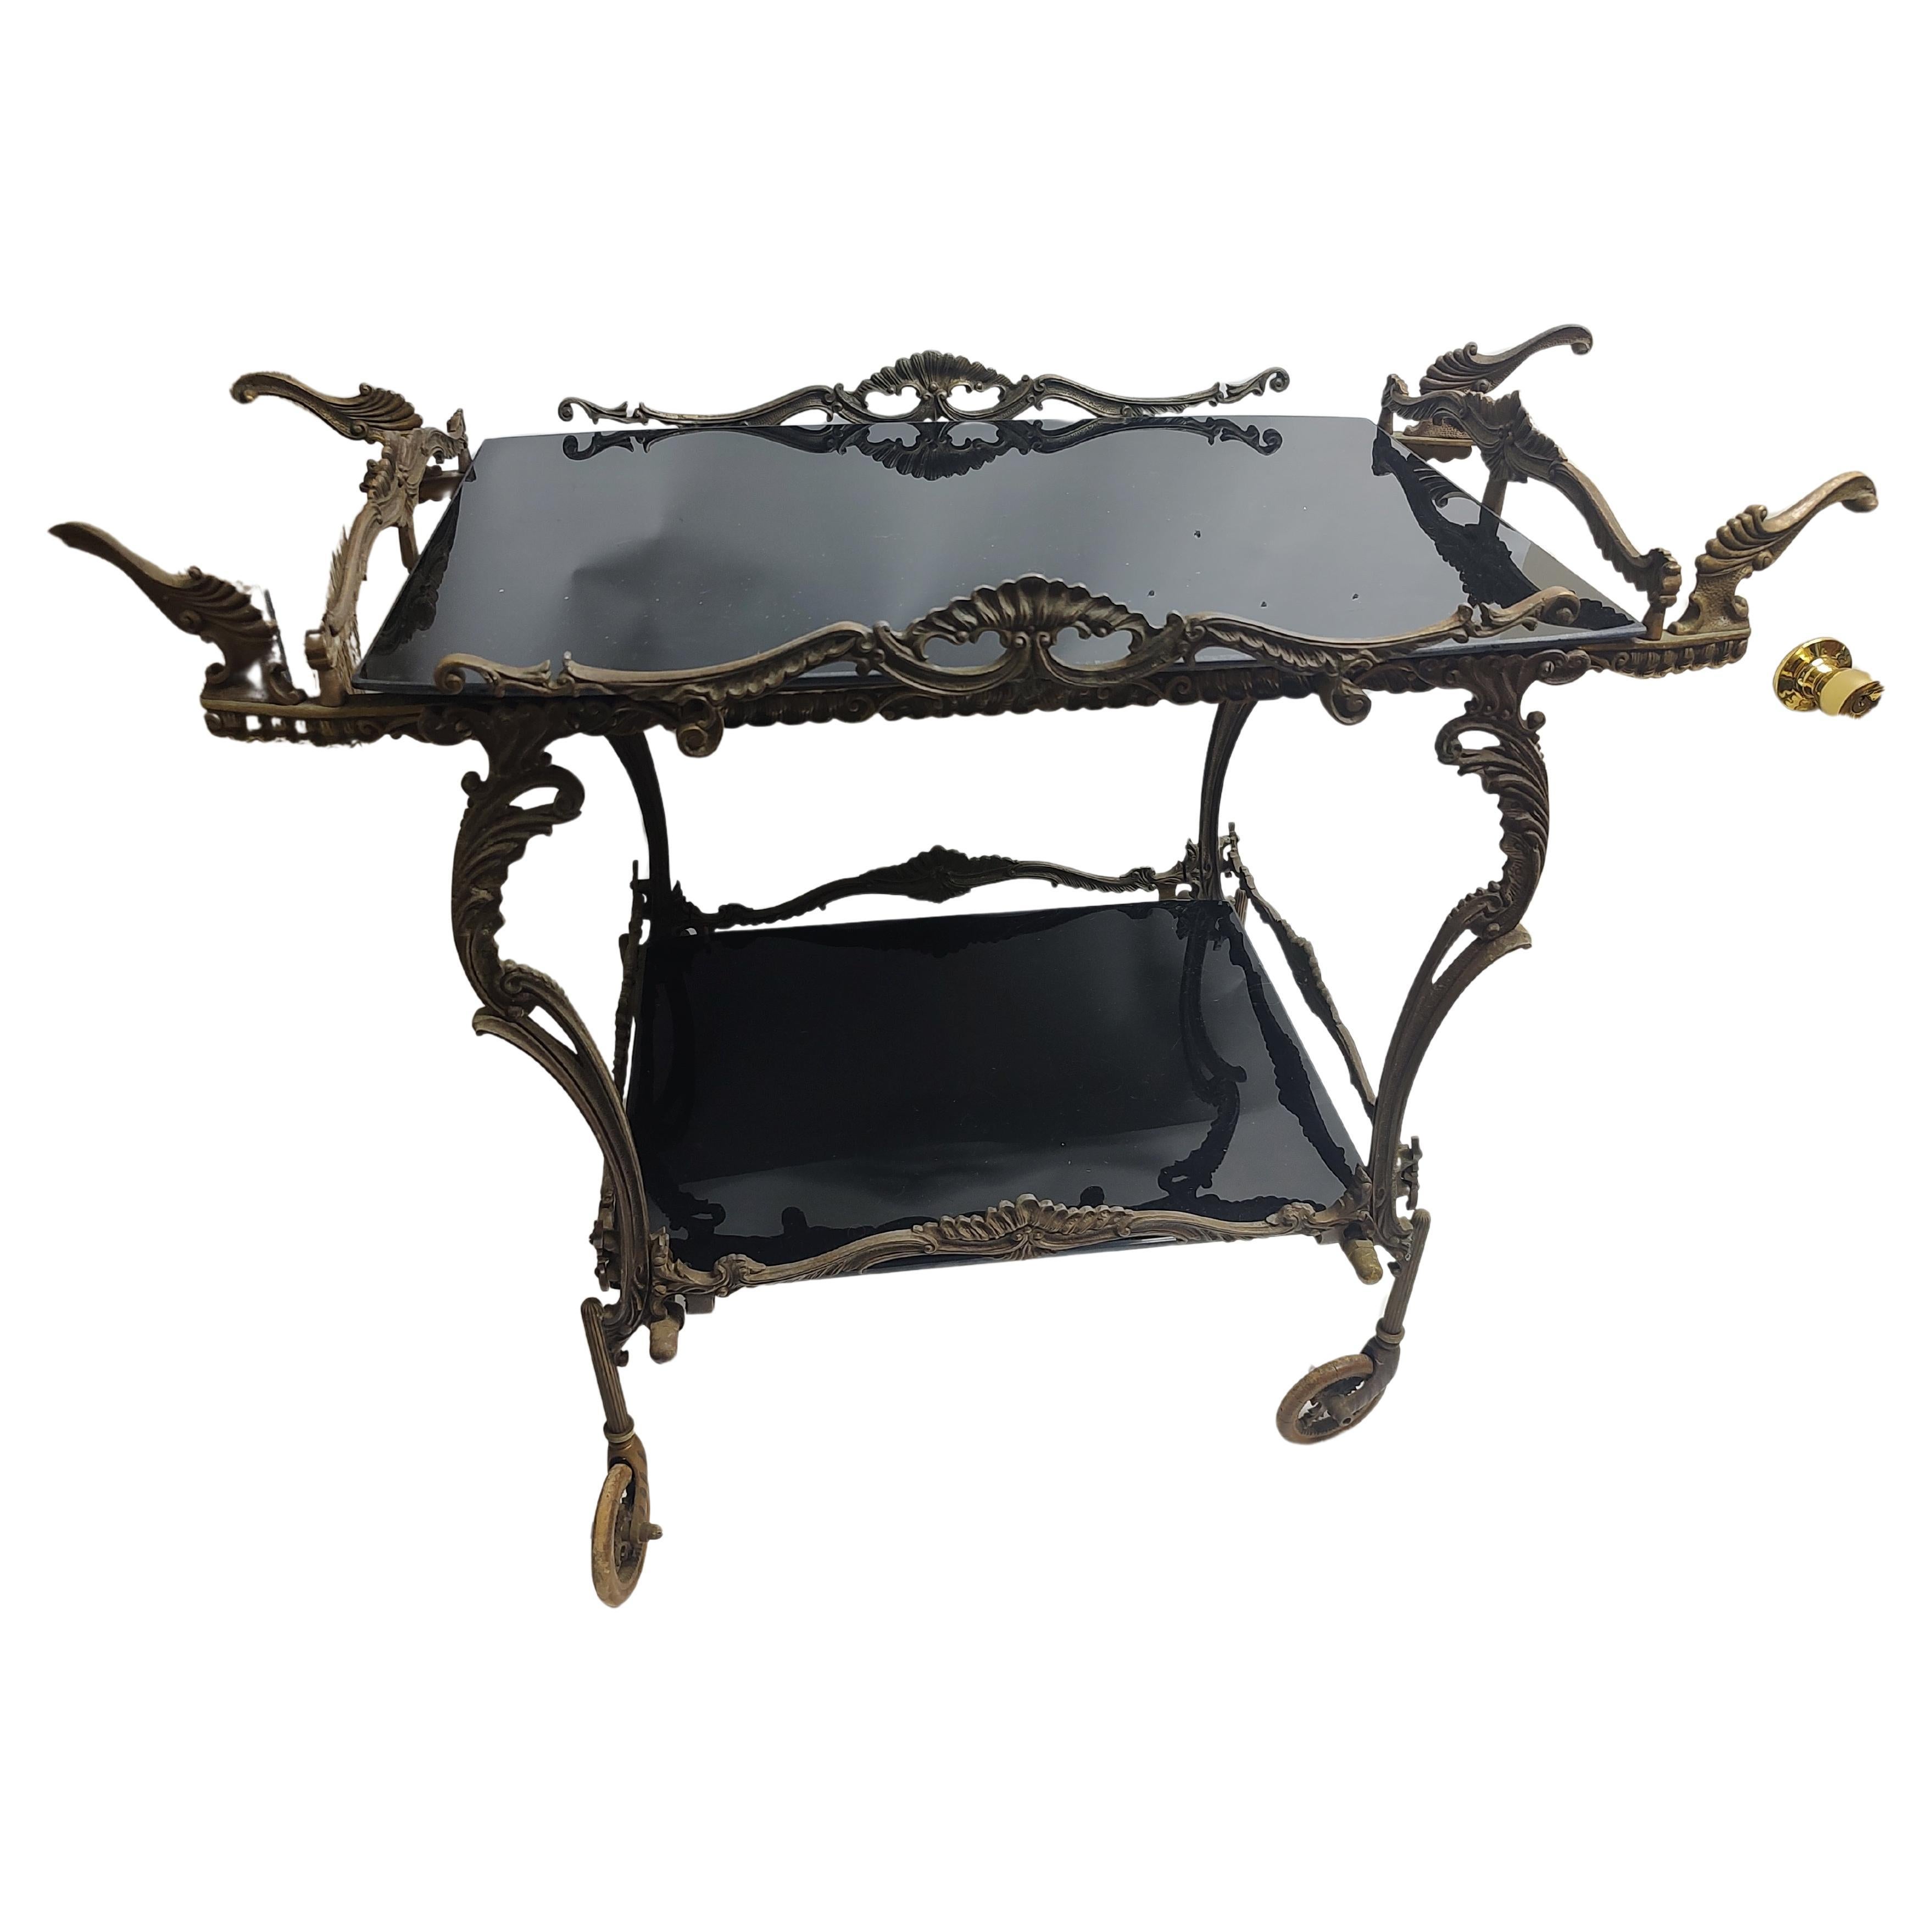 Very elegant with fine brass castings in a petite bar serving cart from France. Two black glass shelves bottom shelf is 19 x 14 and the top shelf is 15.5 x 23. A smaller size for a dining room or patio terrace with a minimal space available. Brass